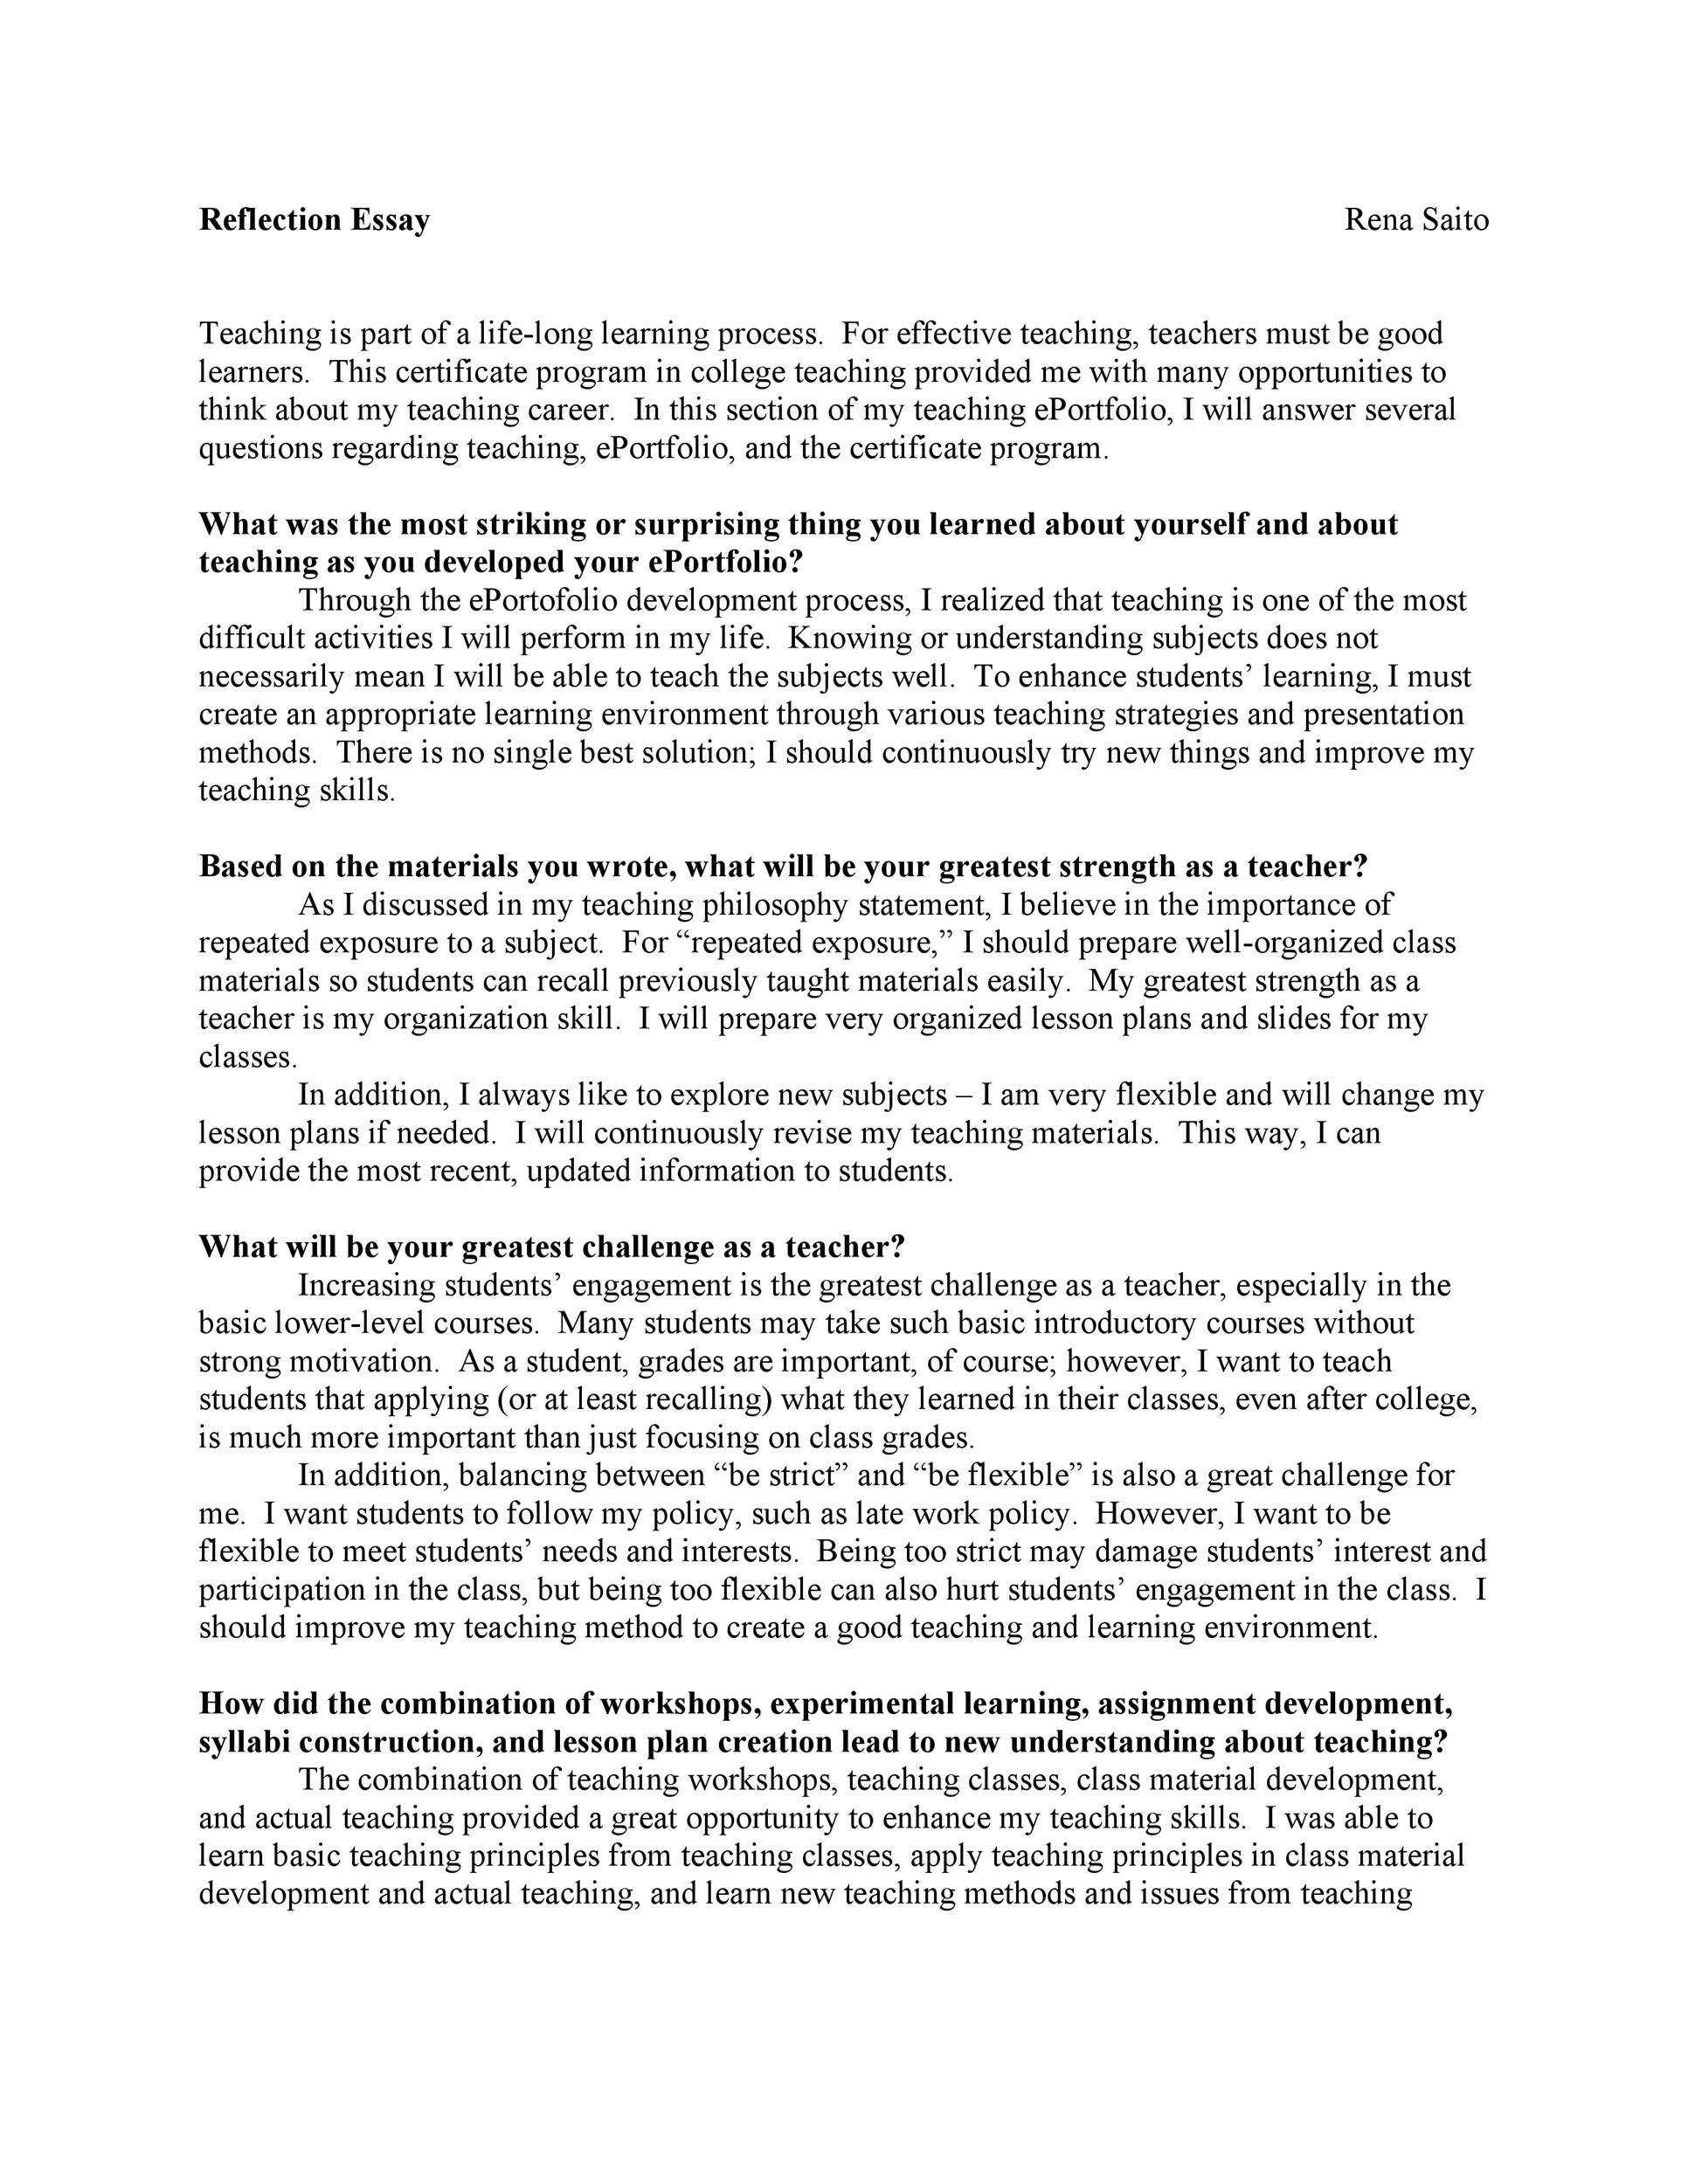 example thesis statement reflection paper